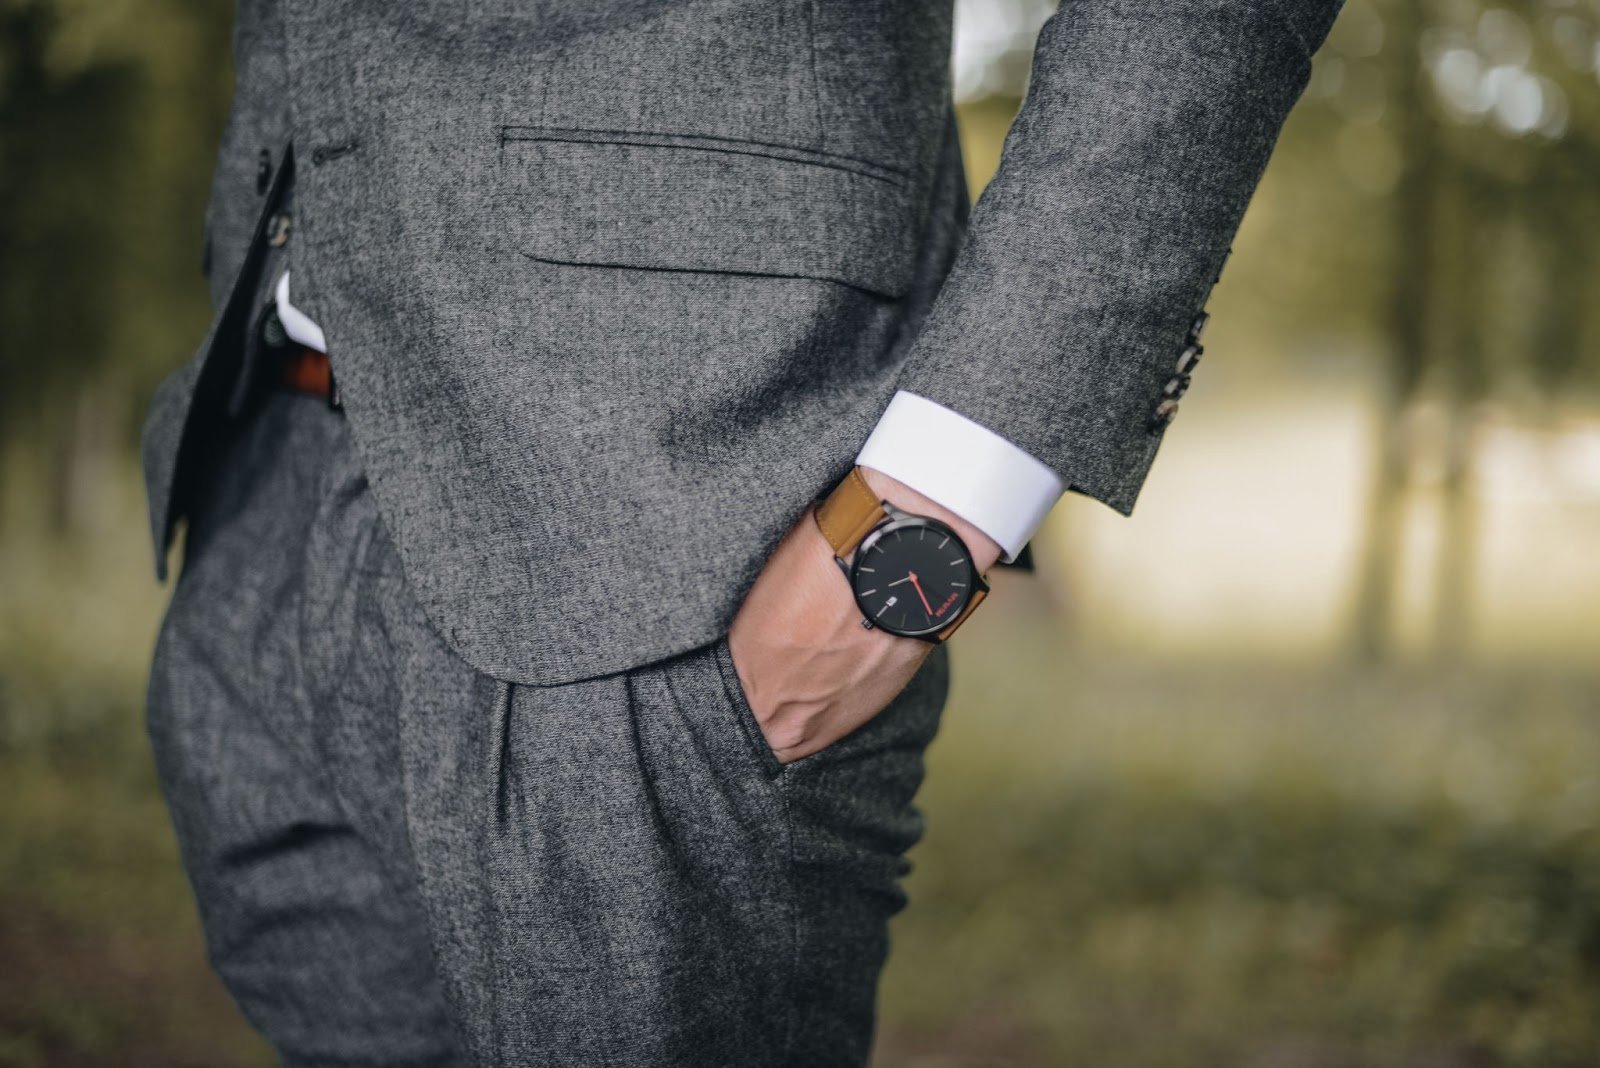 man-wearing-watch-with-hand-on-pocket-447570/ business dress code